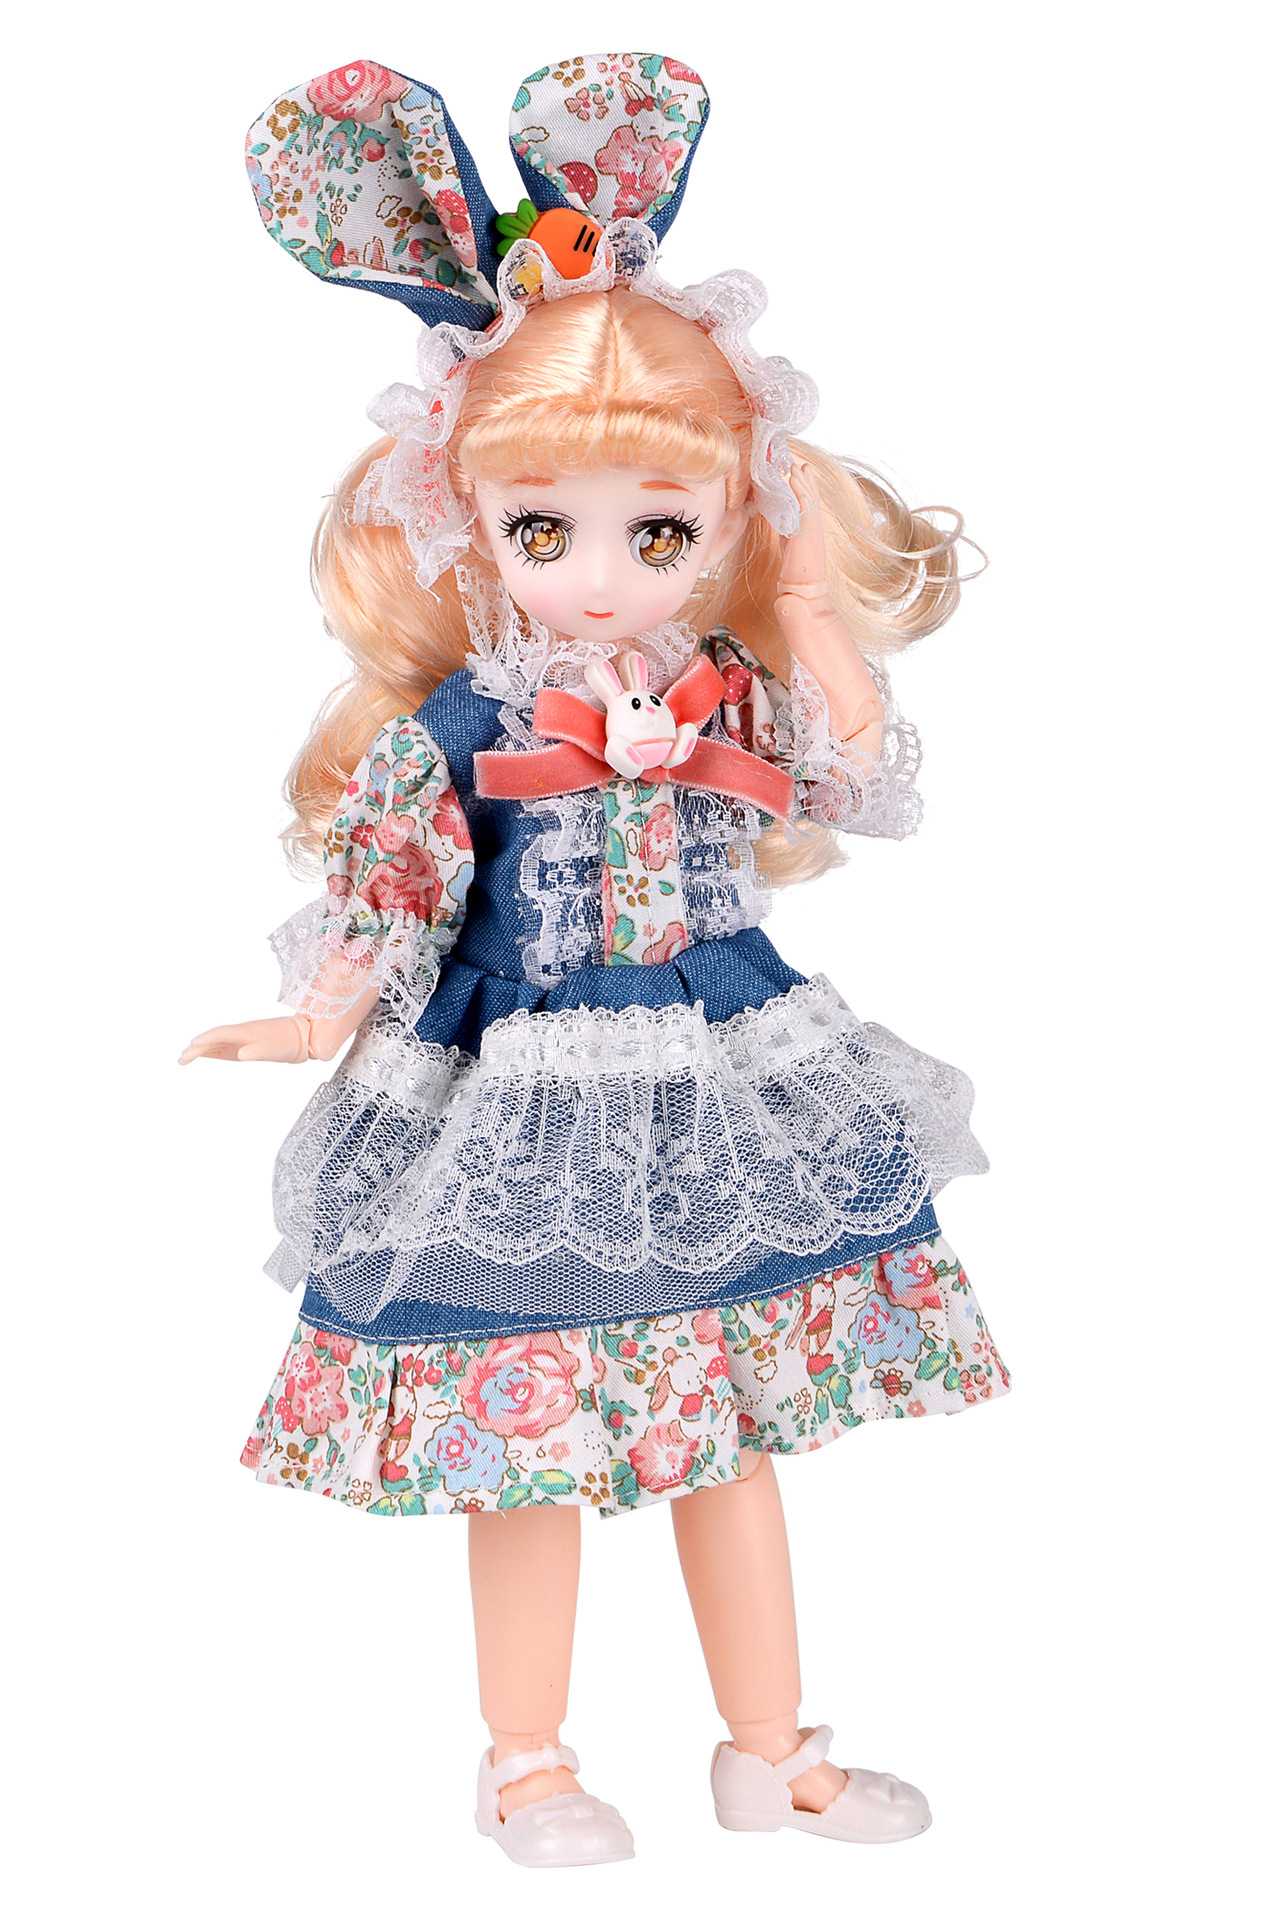 5D Eye Multi-Joint 6 Points BJD Doll Princess 30cm Two-Dimensional Doll Clothes Girls Playing House Toy